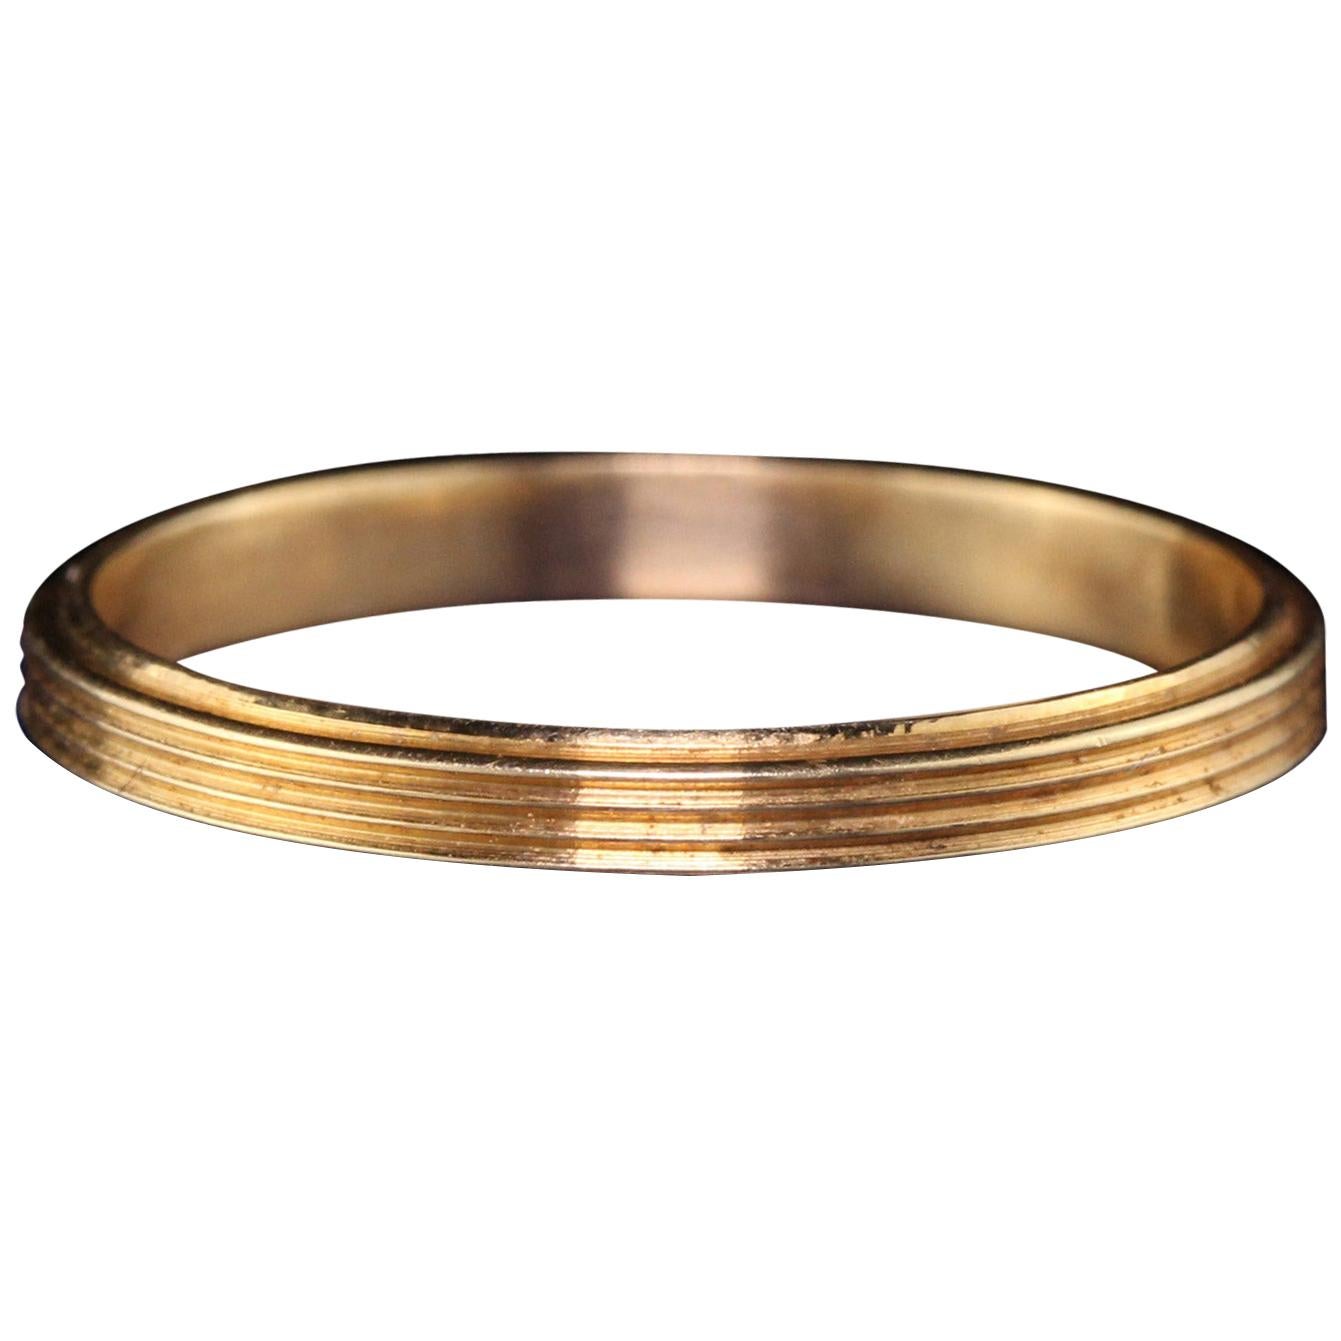 Antique Art Deco 14K Yellow Gold Engraved Wedding Band - Size 6 1/2 For Sale